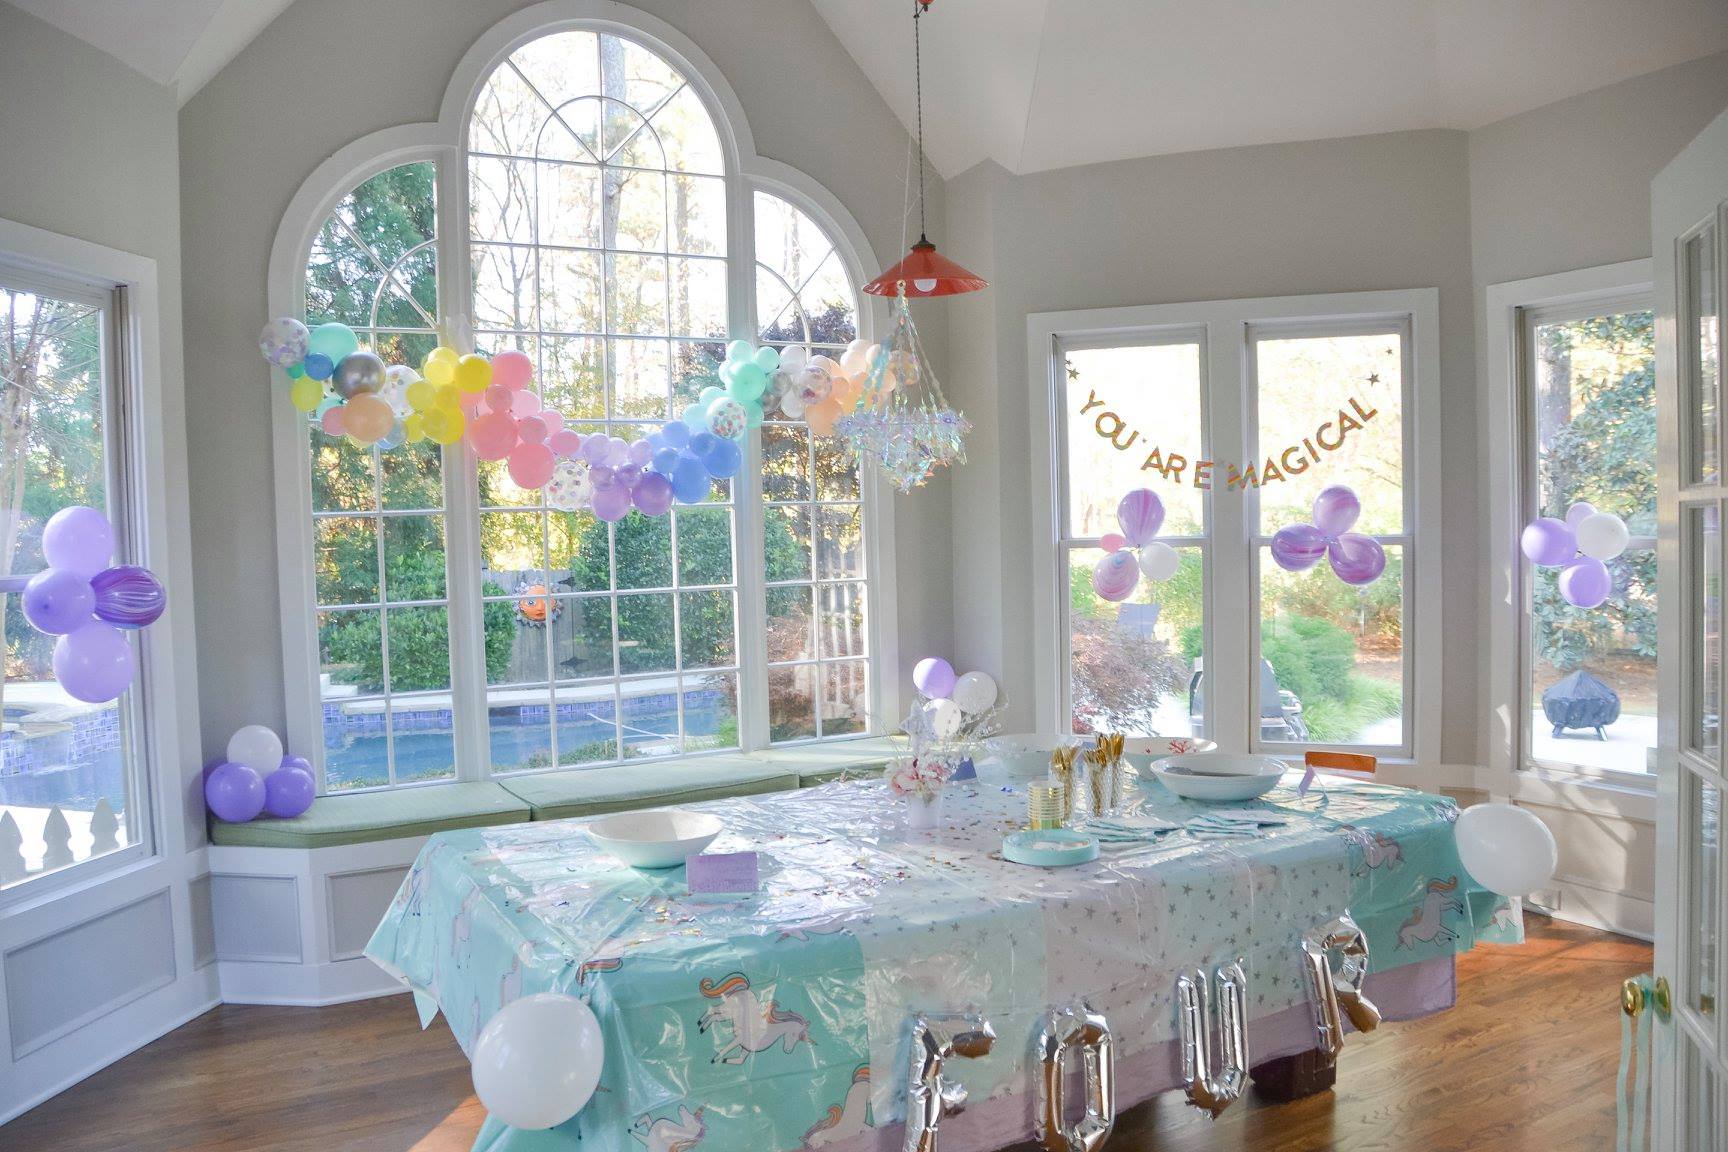 How to Decorate Kids’ Birthday Parties with Balloons Decor?